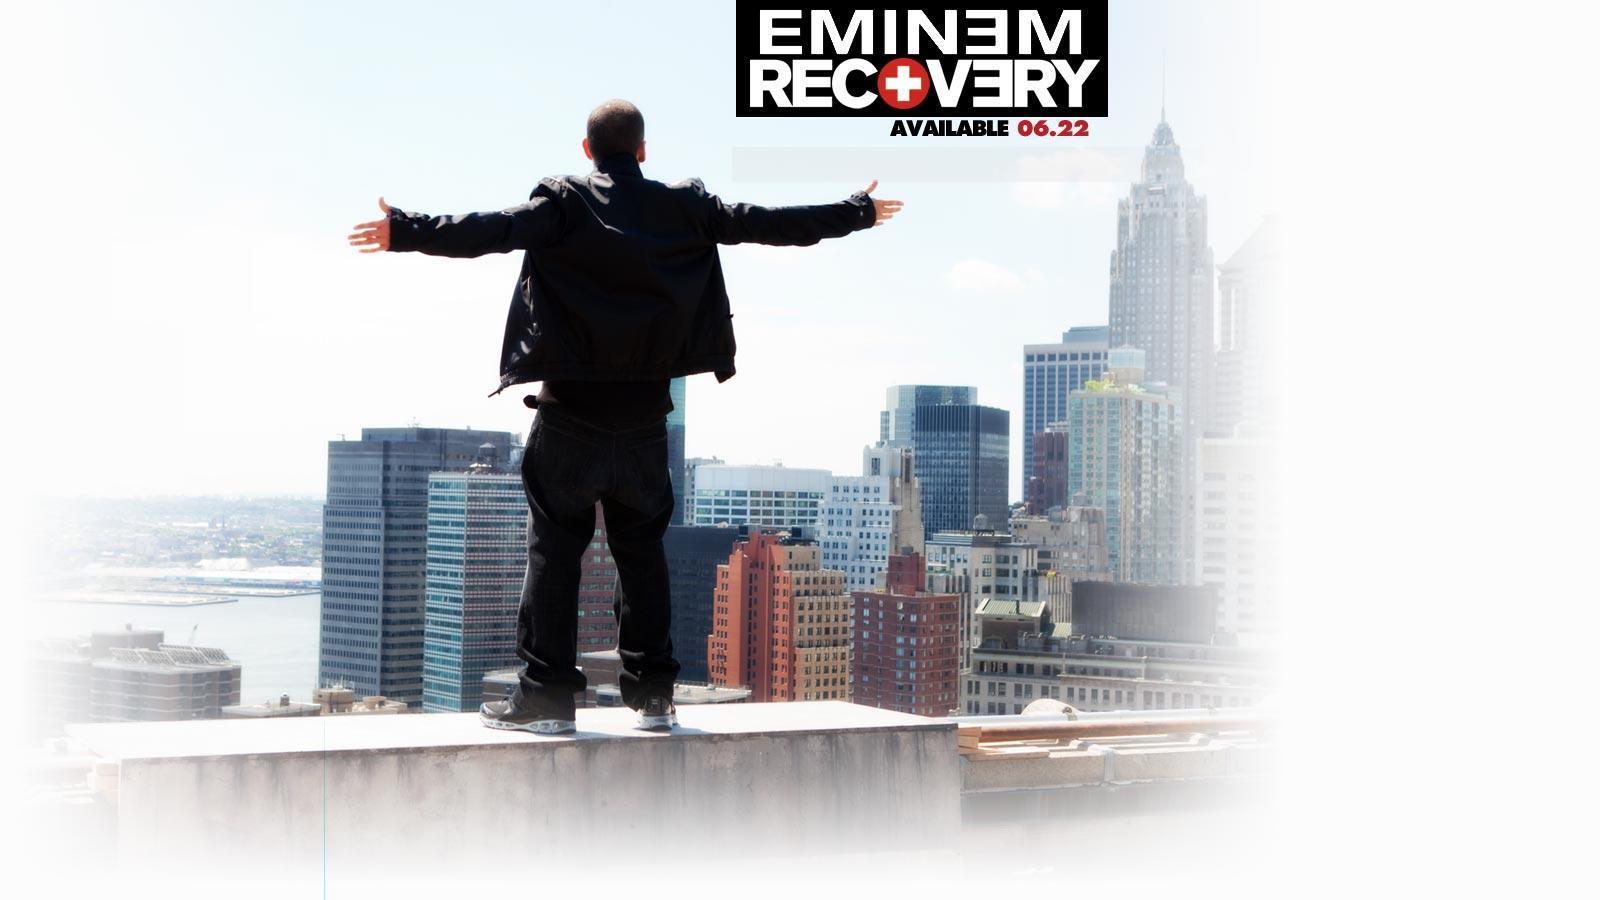 Eminem Recovery Wallpapers - Wallpaper Cave1600 x 900